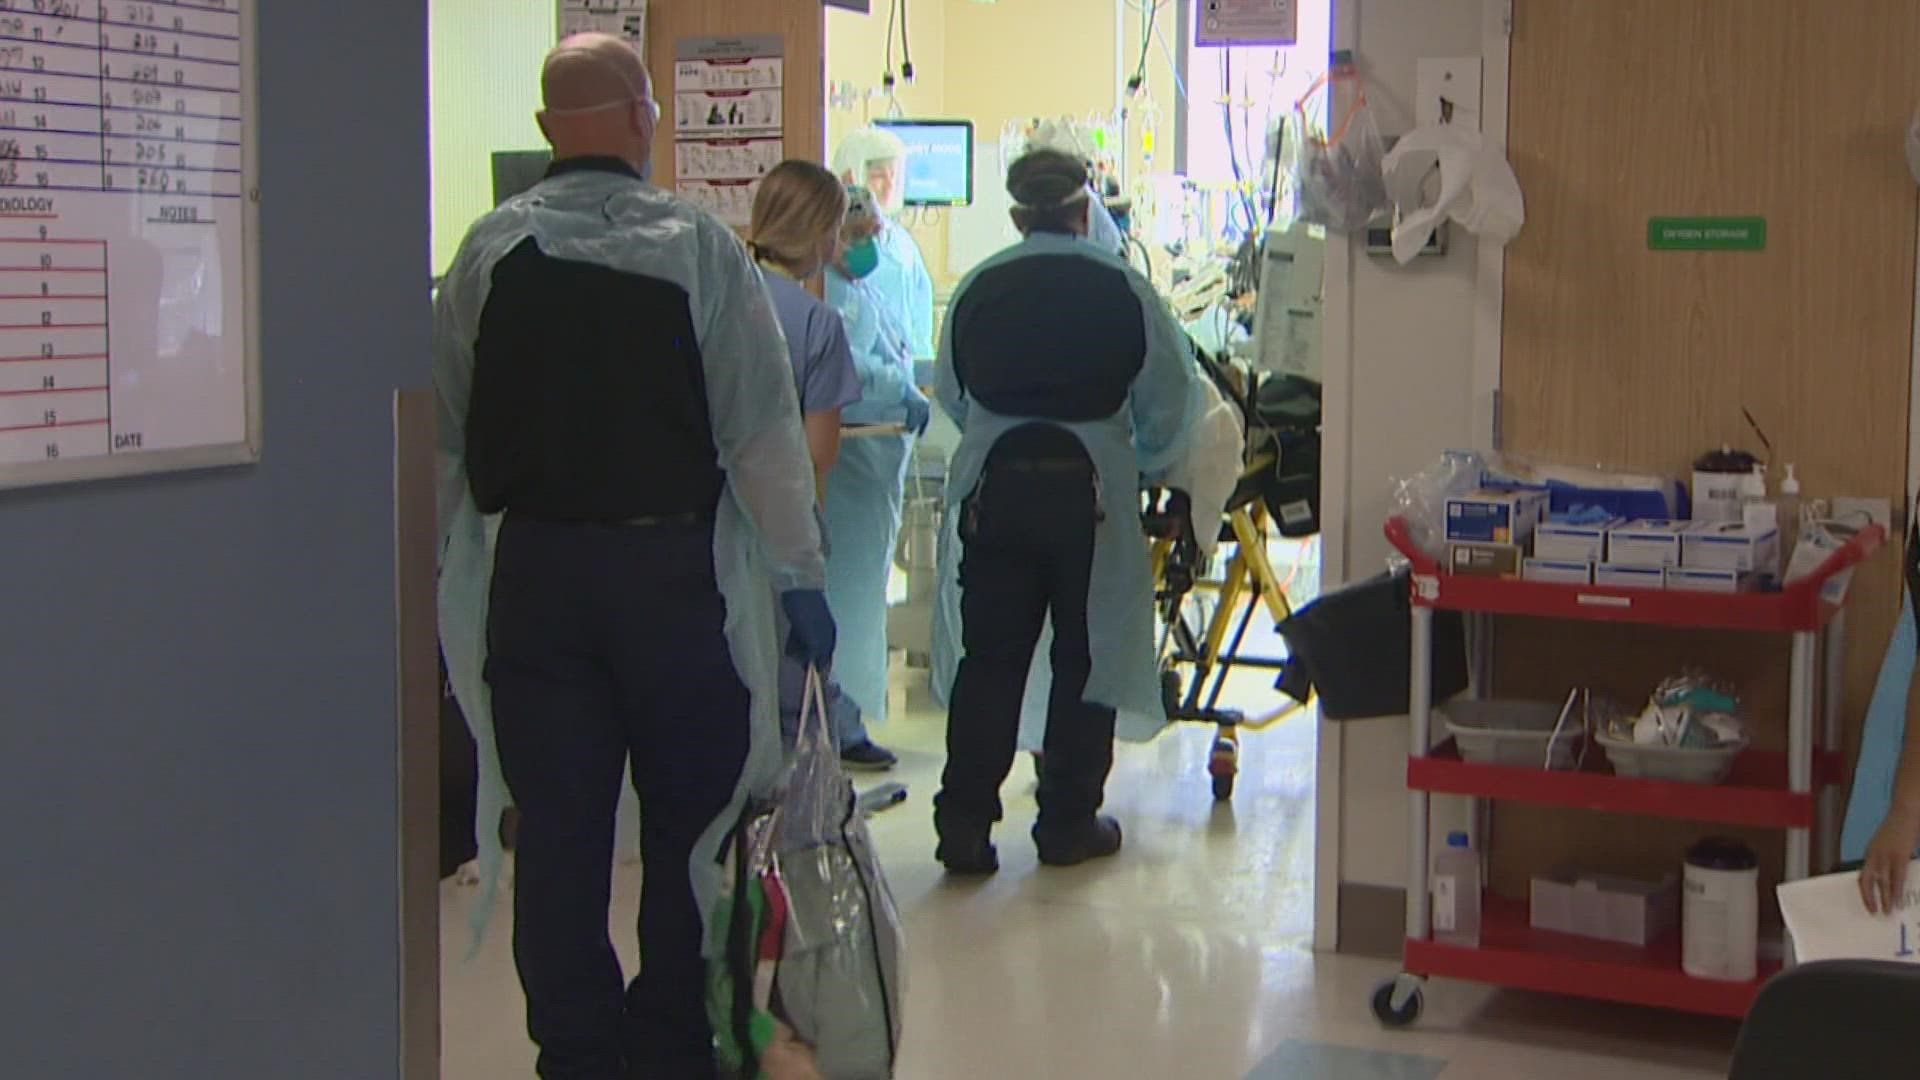 KING 5 goes inside a Harborview intensive care unit where staff are treating people in their 30s and 40s with severe forms of COVID-19.